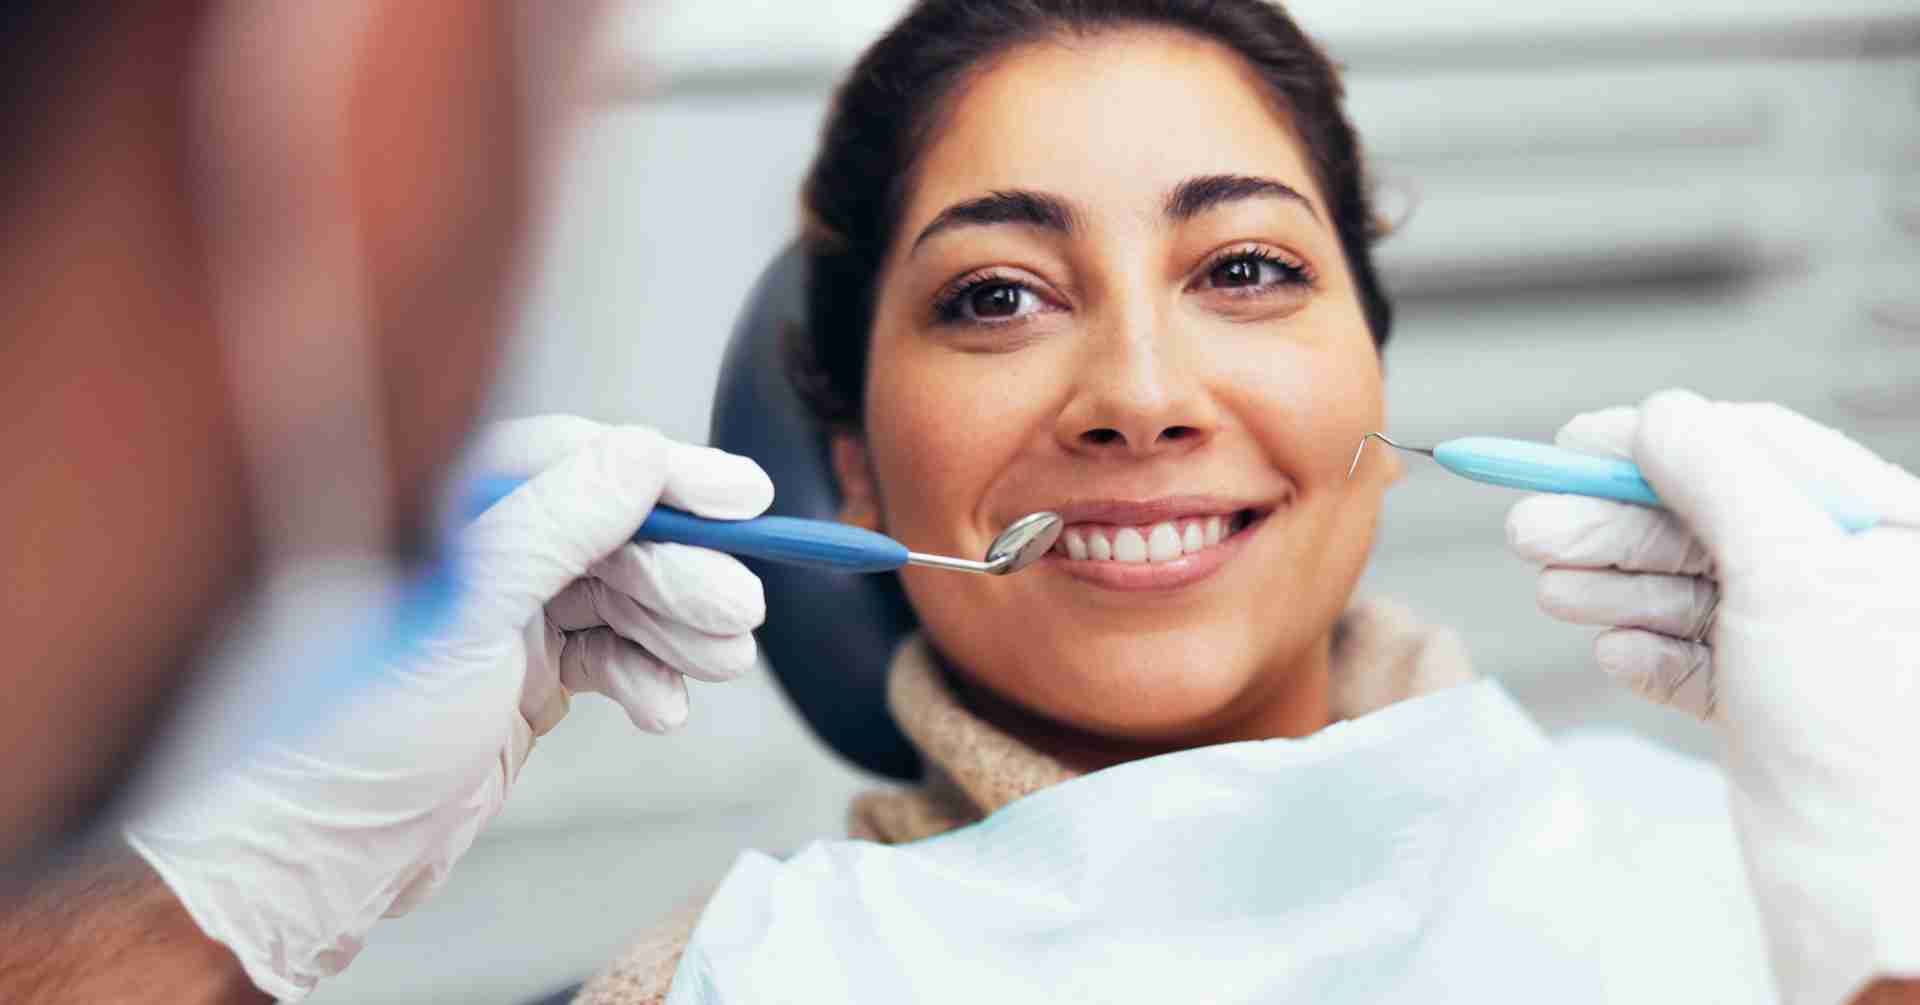 What are clear signs indicating it’s time for a visit to the dentist?